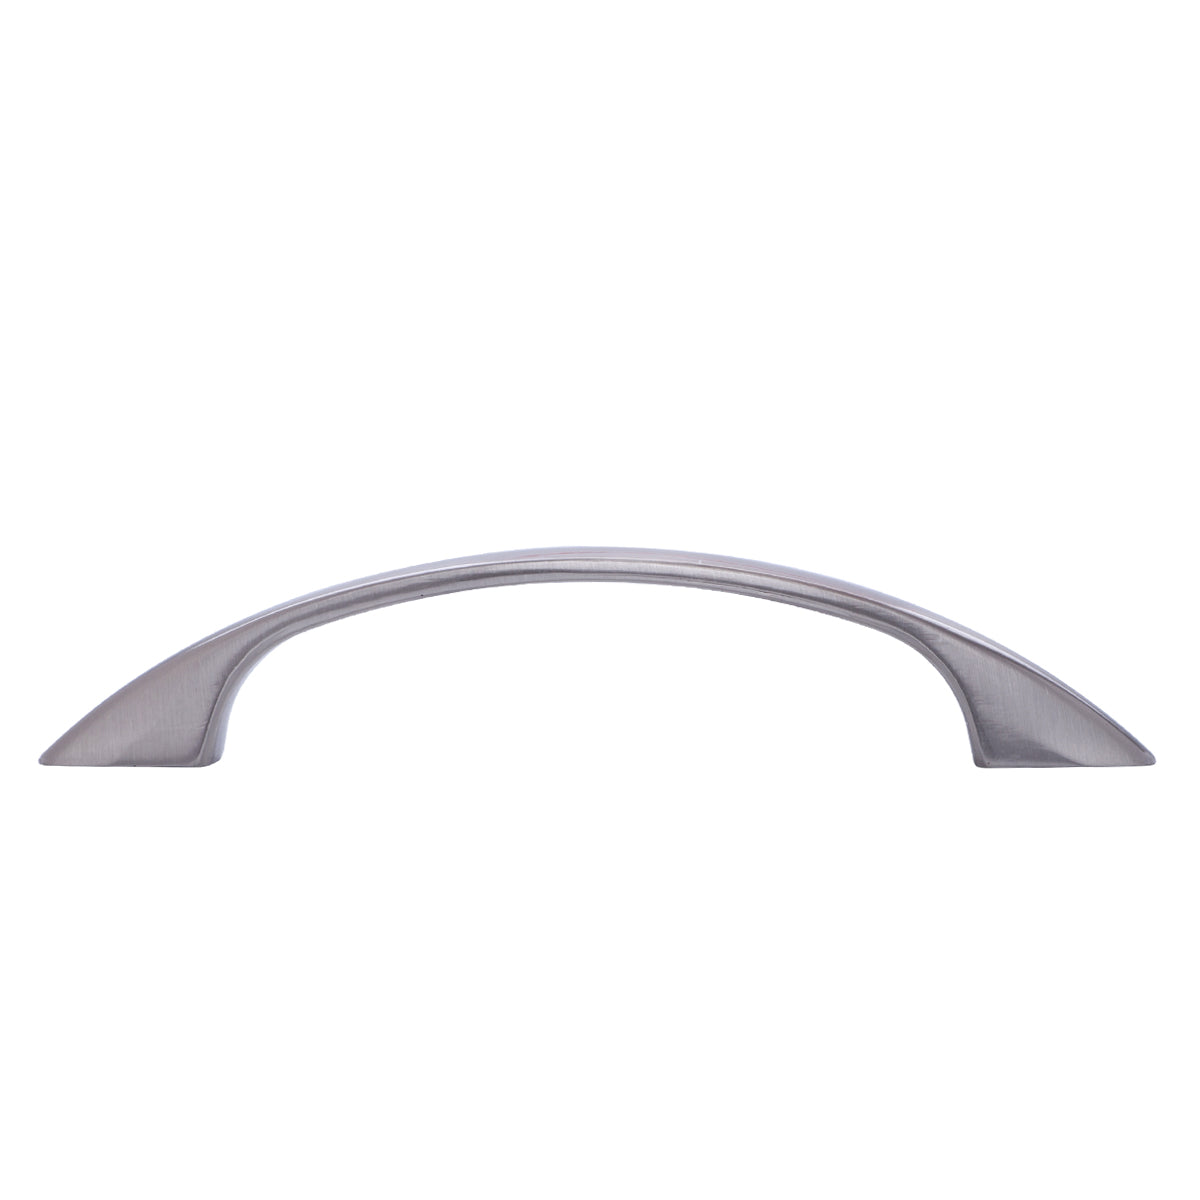 South Main Hardware Arch Cabinet Handle, 4" Length (3" Hole Center), Satin Nickel